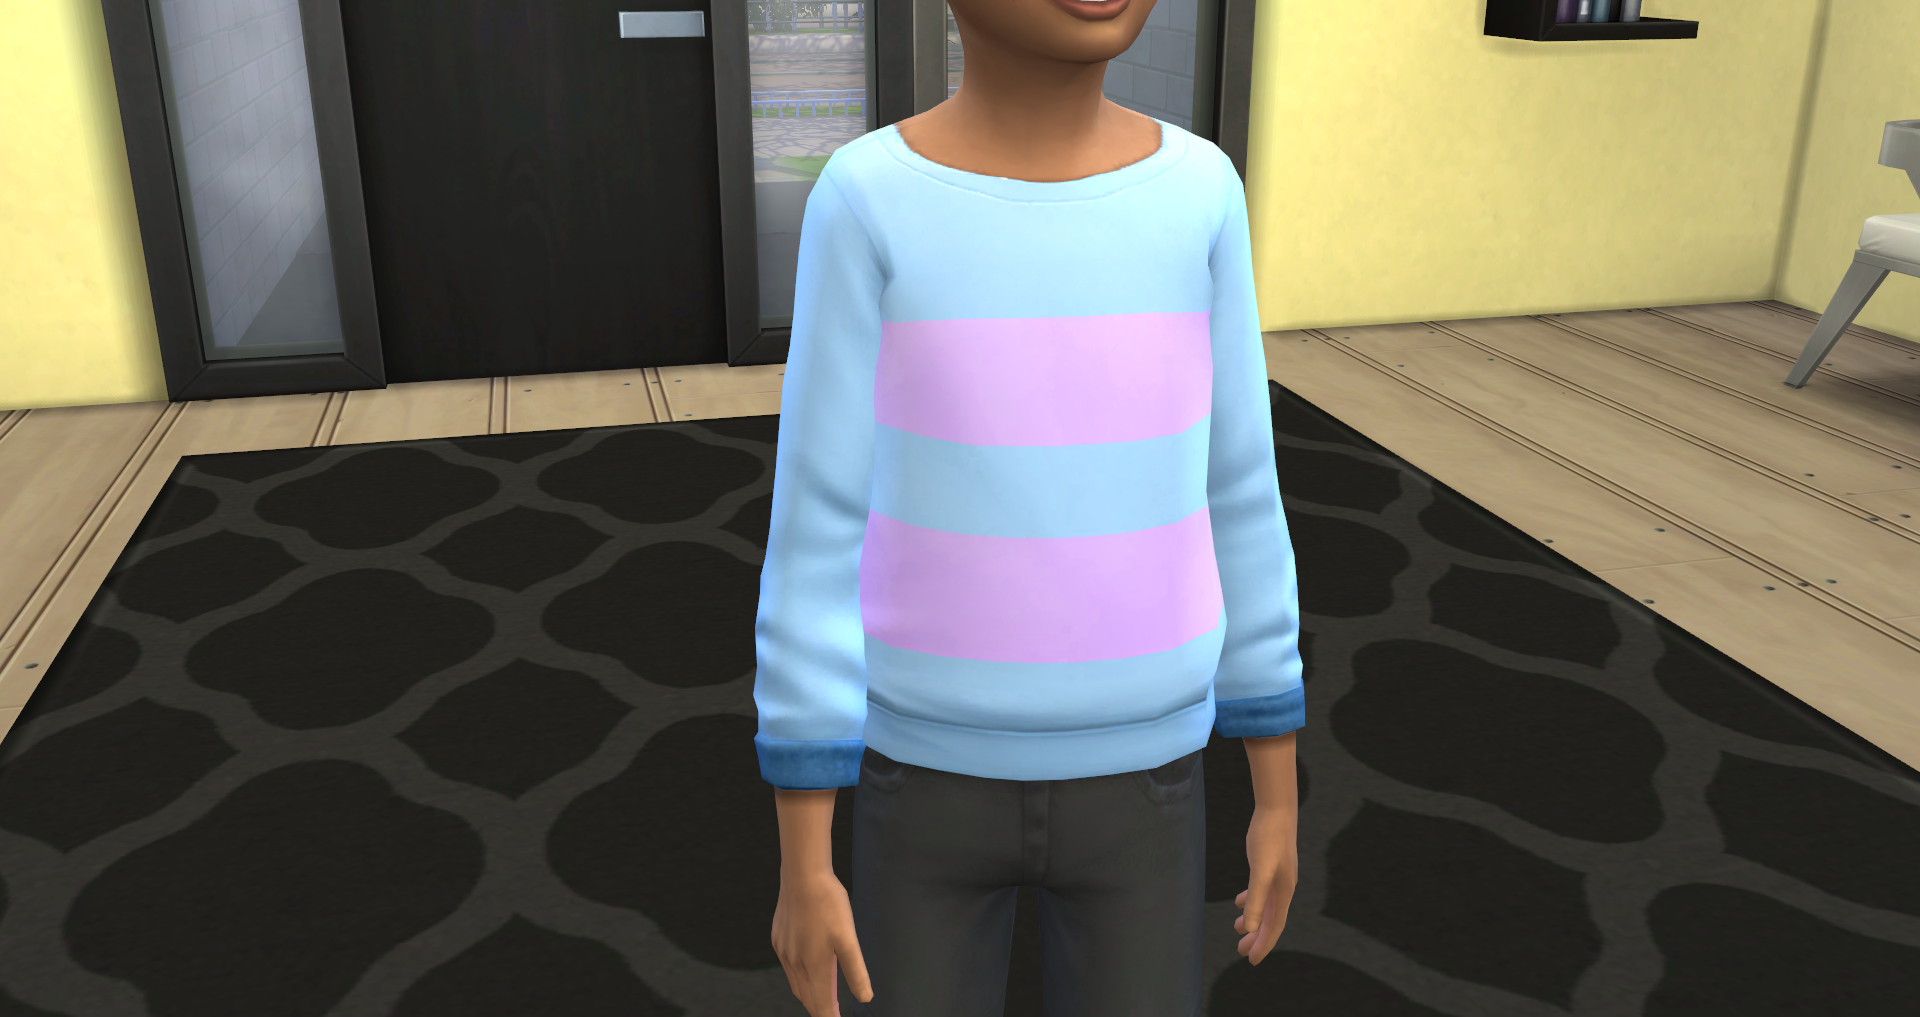 The Sims 4 Cas Undertale Chara Youtube - vrogue.co